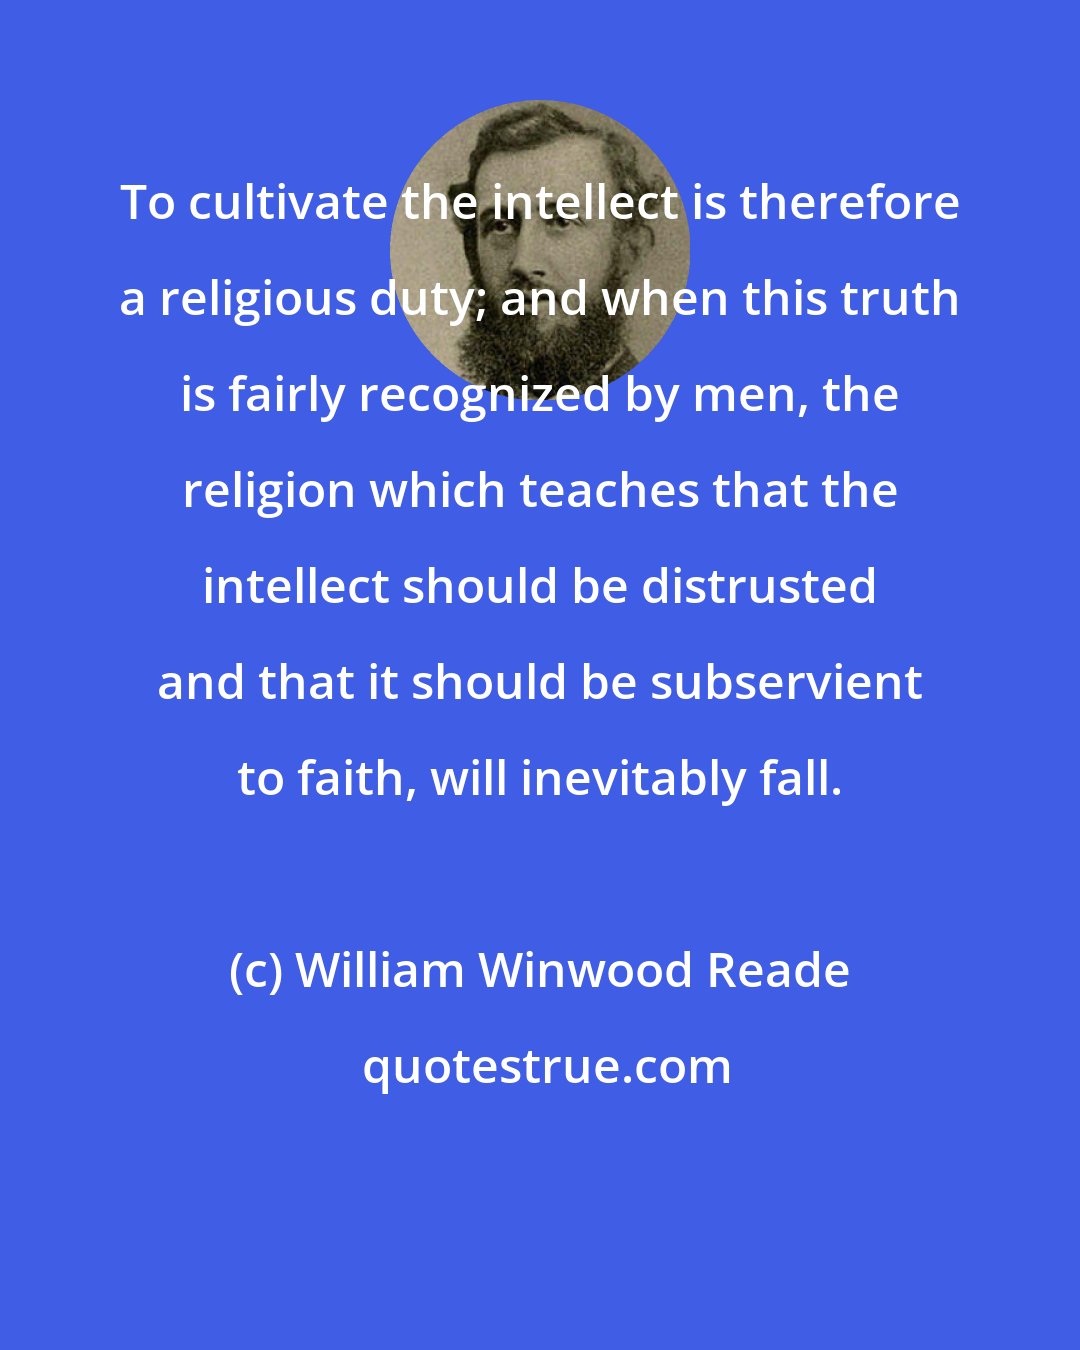 William Winwood Reade: To cultivate the intellect is therefore a religious duty; and when this truth is fairly recognized by men, the religion which teaches that the intellect should be distrusted and that it should be subservient to faith, will inevitably fall.